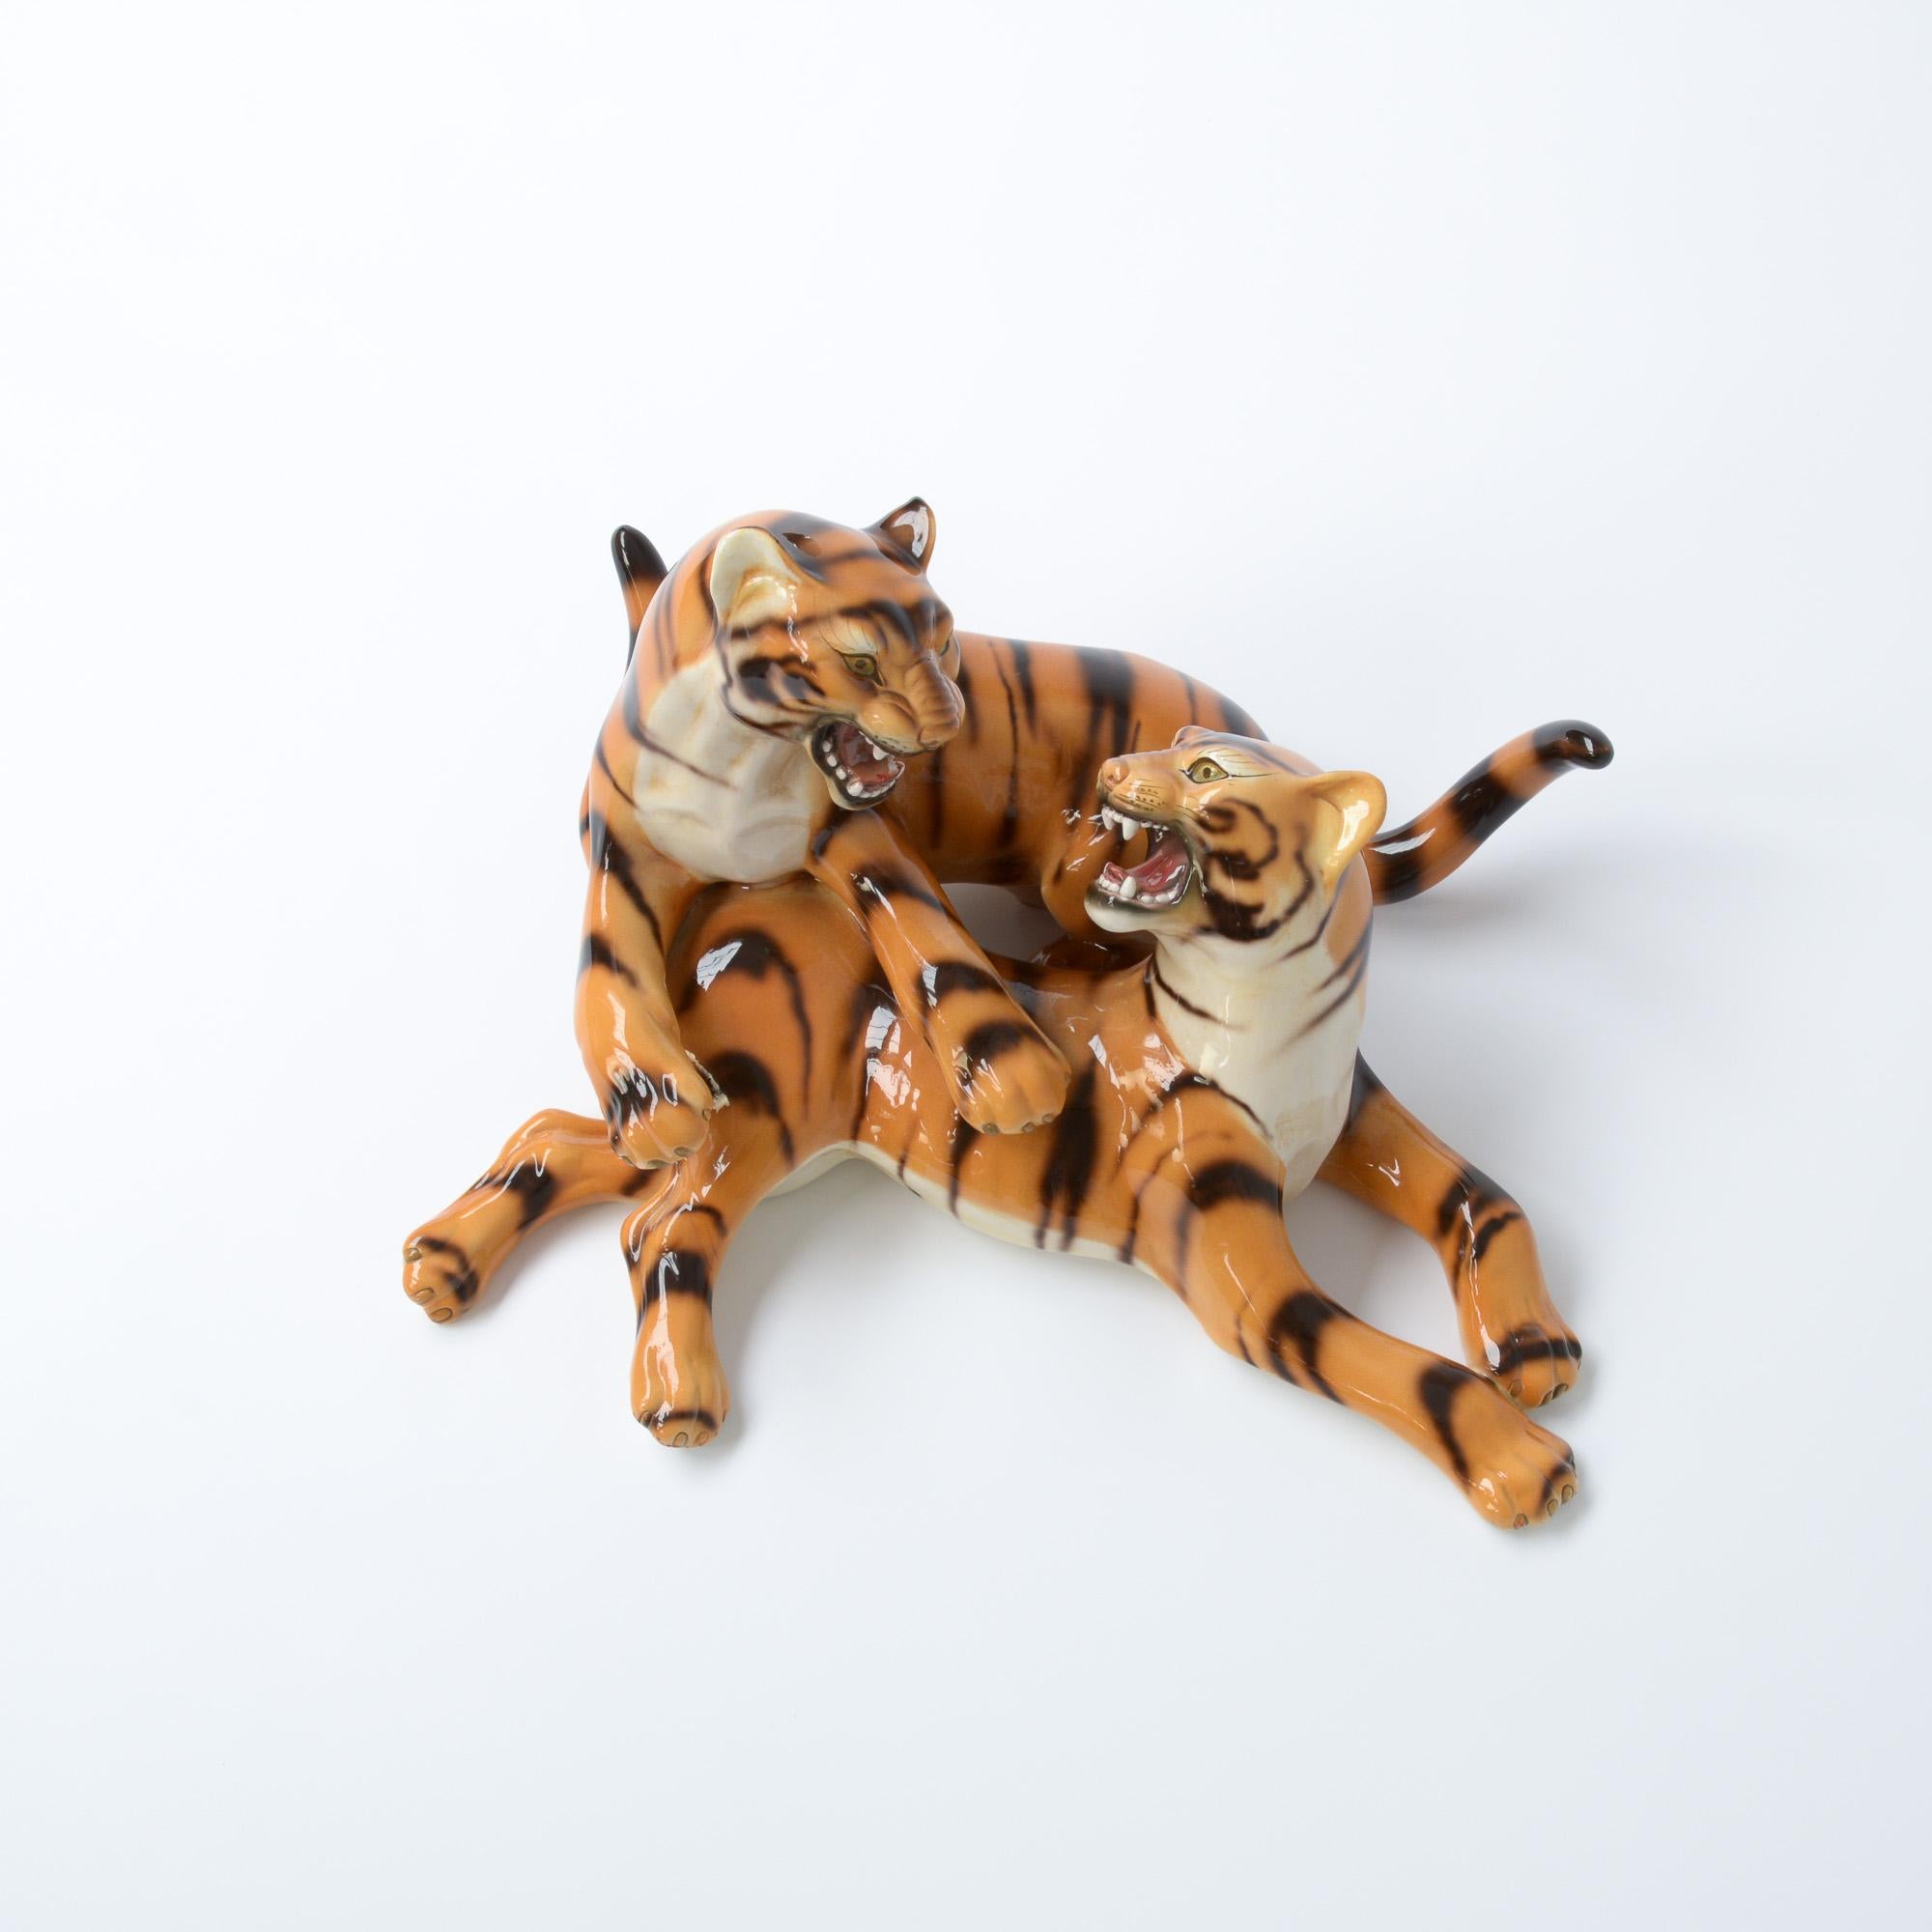 Mid-Century Modern Porcelain Sculpture of Playing Tigers by Ronzan, Italy